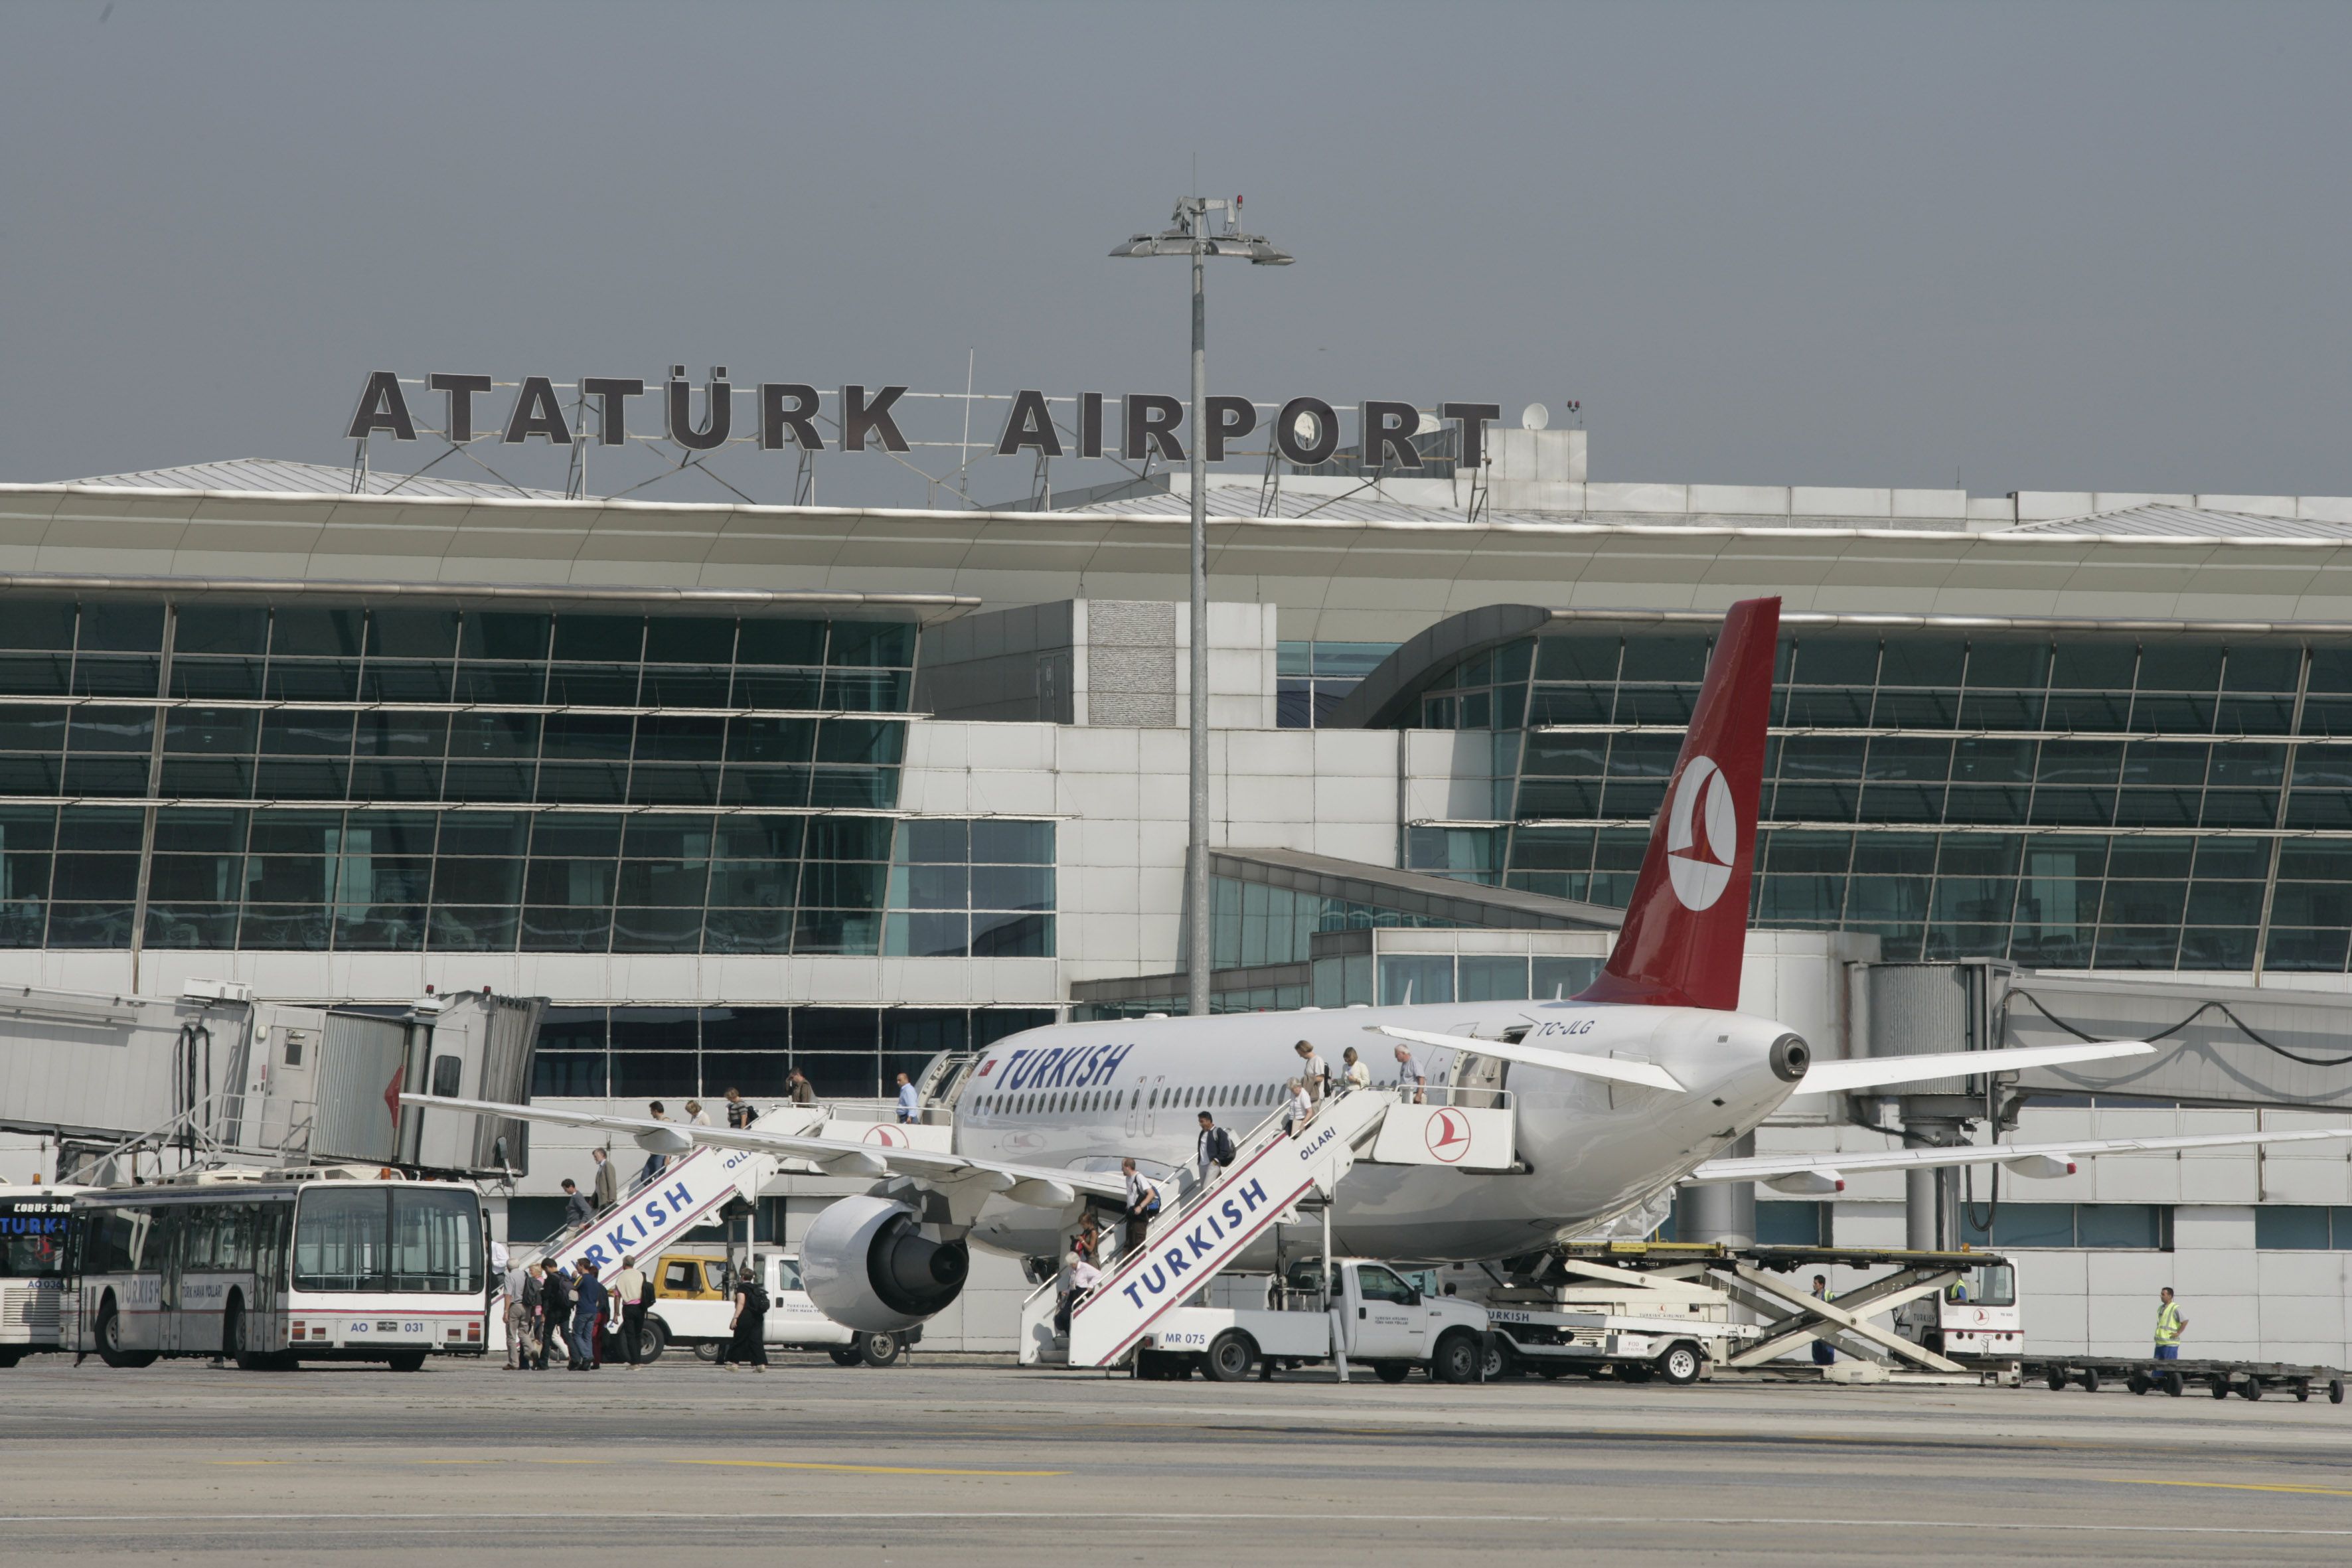 Danish traveller describes the scene at Turkey’s Atatürk Airport as “total chaos”